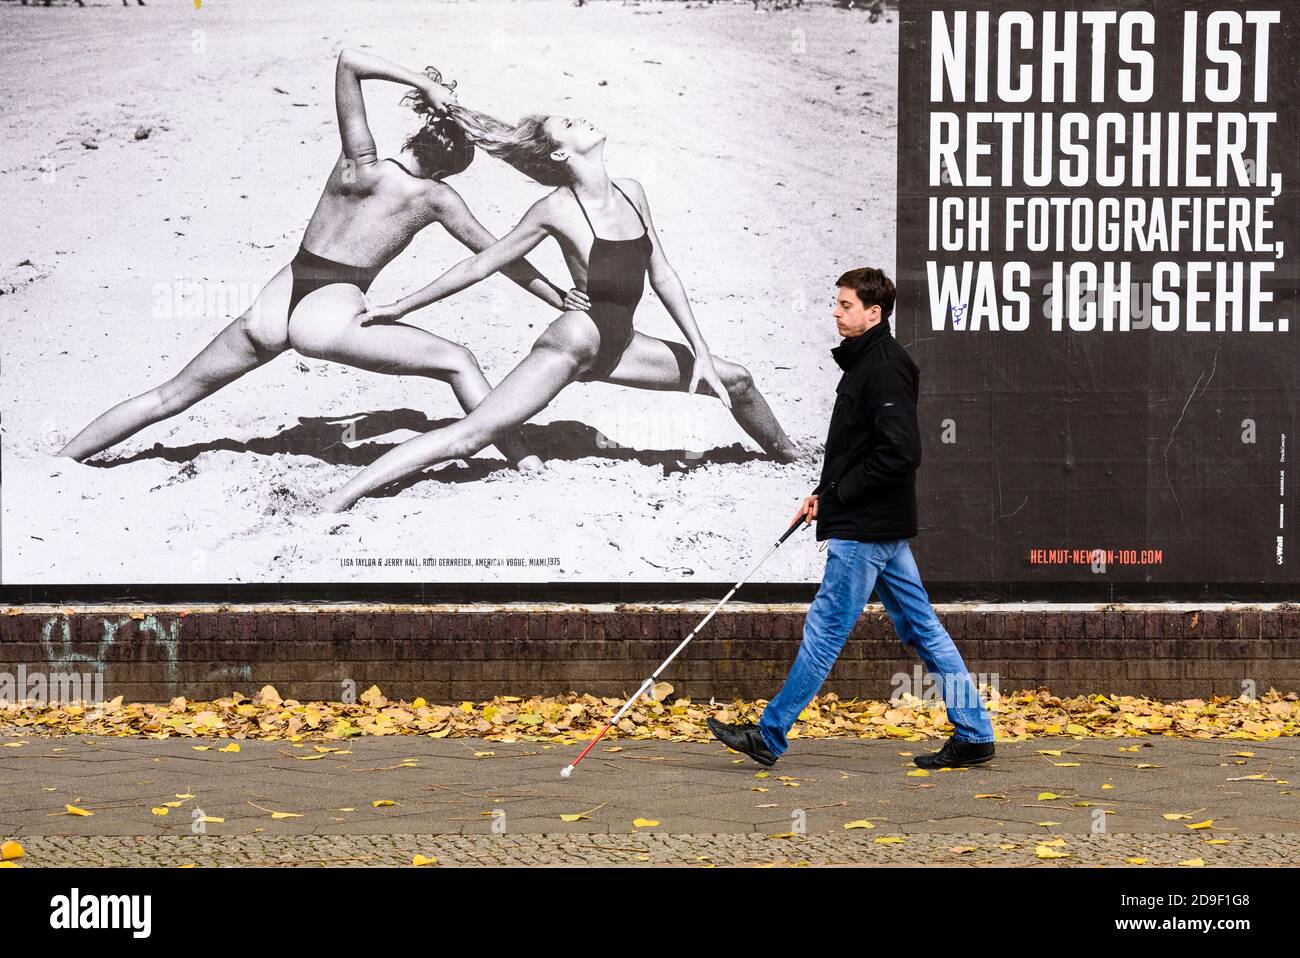 Berlin, Berlin, Germany. 5th Nov, 2020. A man with a cane for the blind walks in front of a large black and white photograph by fashion photographer Hetmut Newton next to a lettering reading 'Nothing is retouched, I photograph what I see' (German: 'Nicht ist retuschiert, ich fotografie was ich sehe'). On the occasion of the 100th birthday of German-Australian photographer Helmut Newton (born Helmut Neustaedter), the Helmut Newton Foundation is presenting the exhibition 'Helmut Newton One Hundred' with 30 selected works from October 31 to November 8, 2020. The photo exhibition covers the 85 Stock Photo